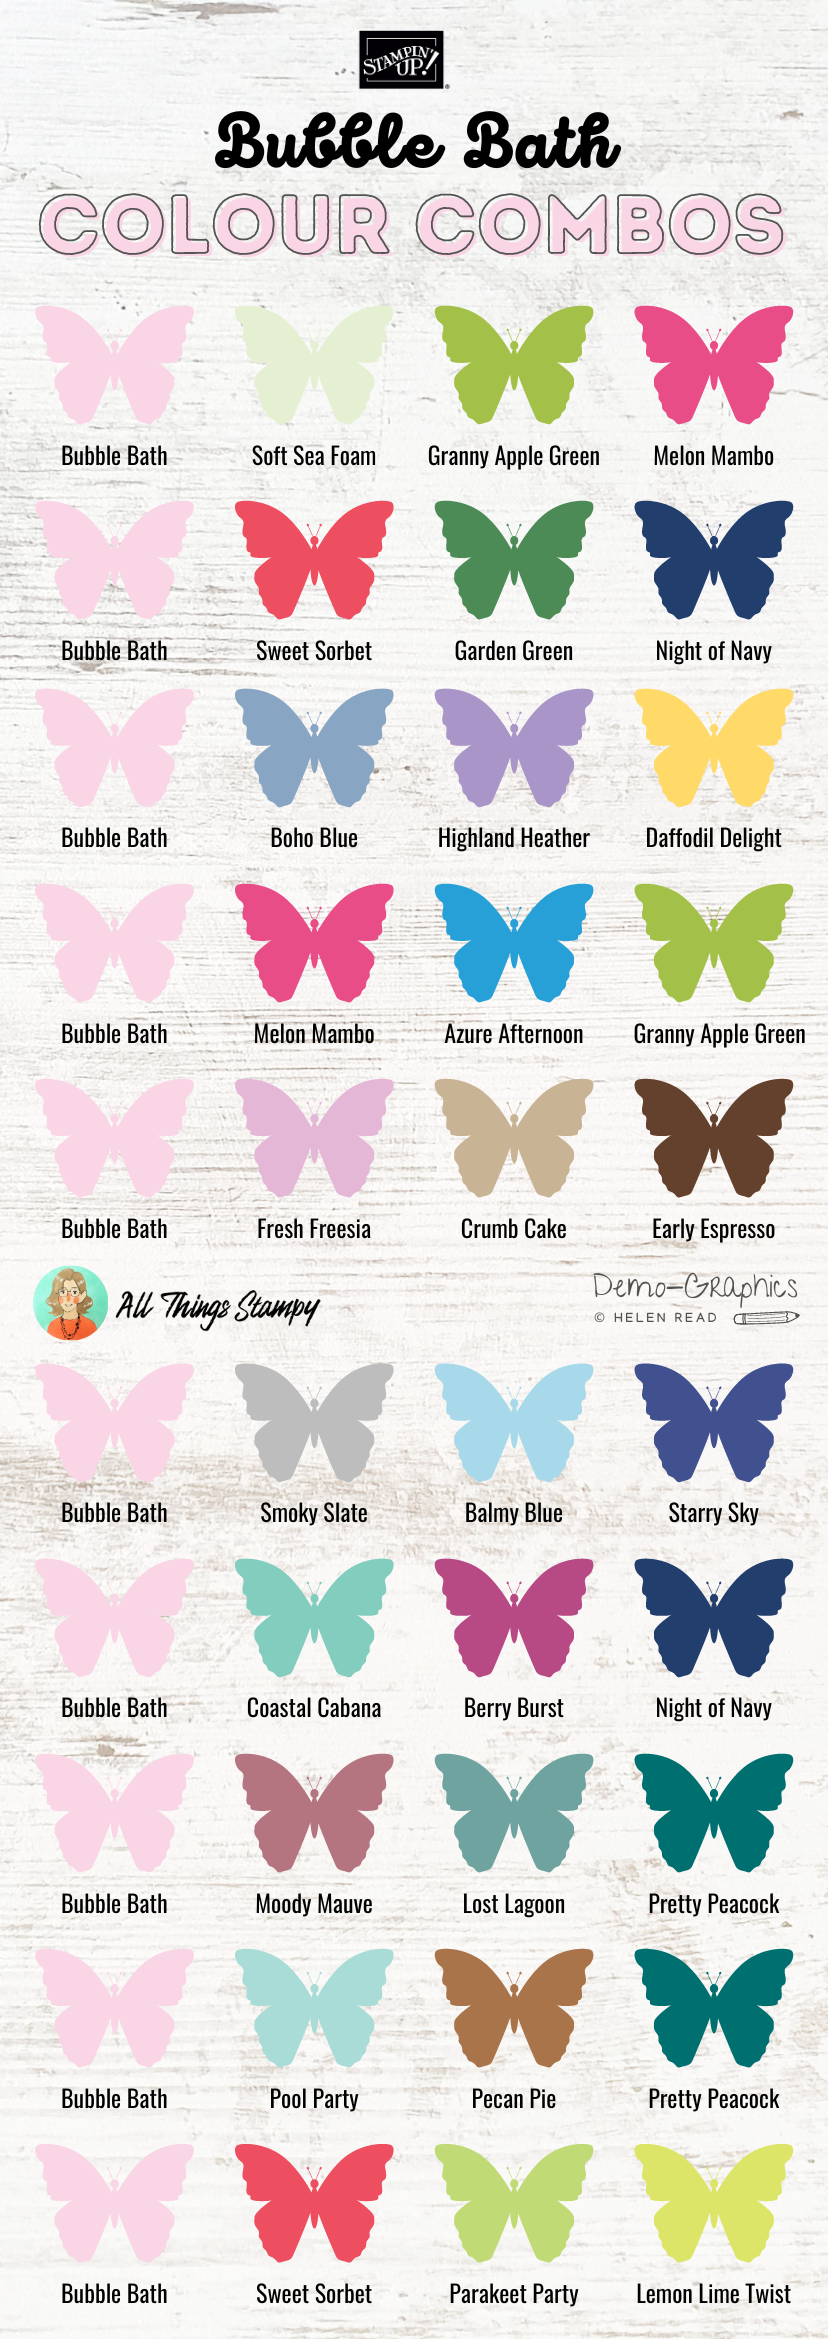 Trena's Stampin' Headquarters: My Favorite Color Combo Chart